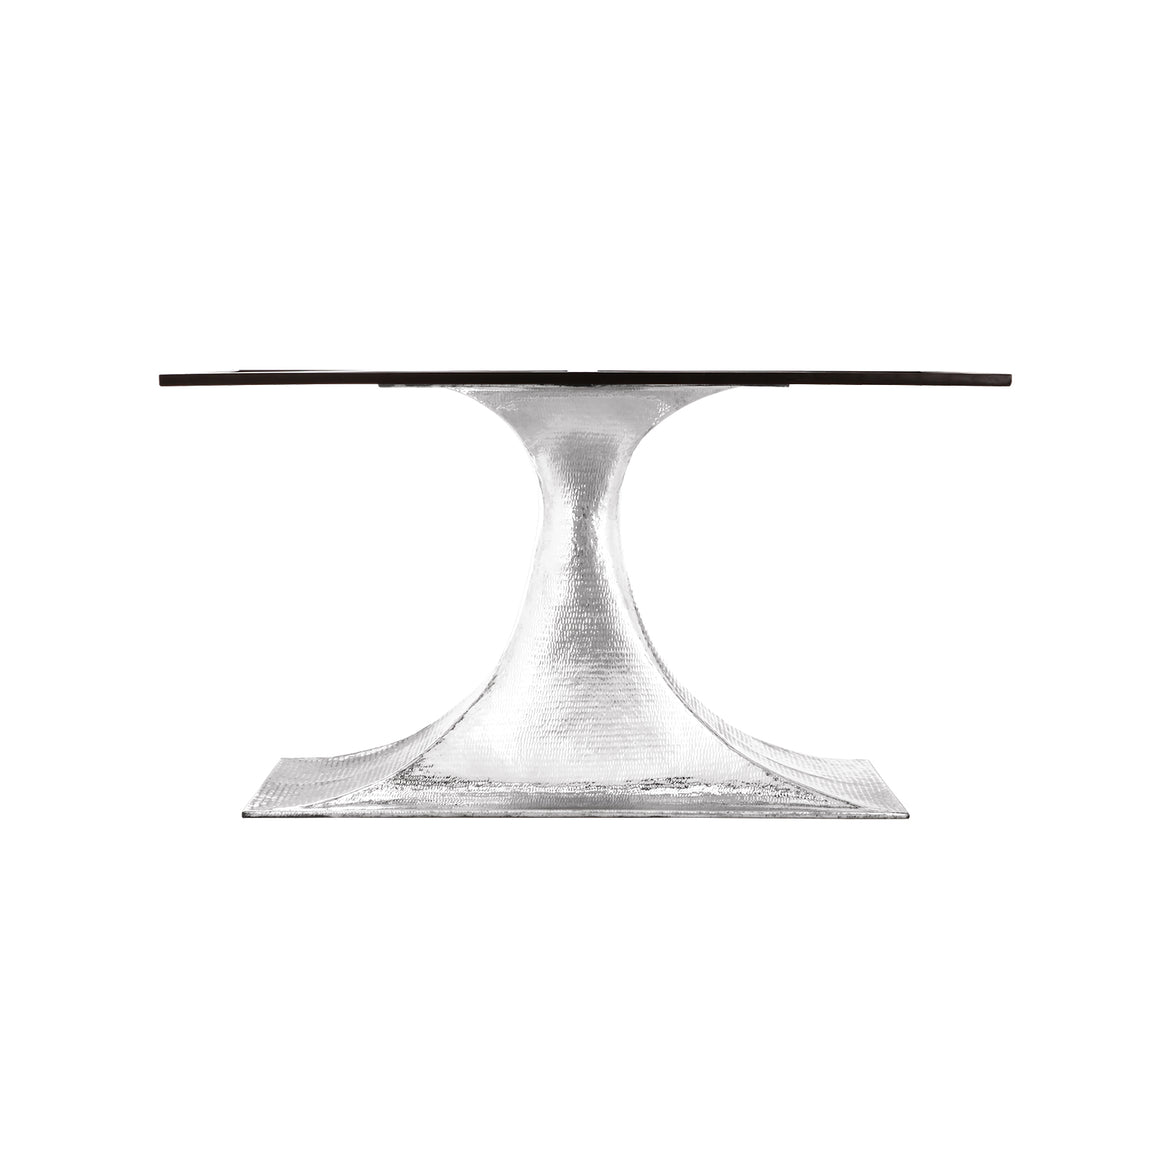 Nickel Oval Dining Table Base | Stockholm Collection | Villa & House